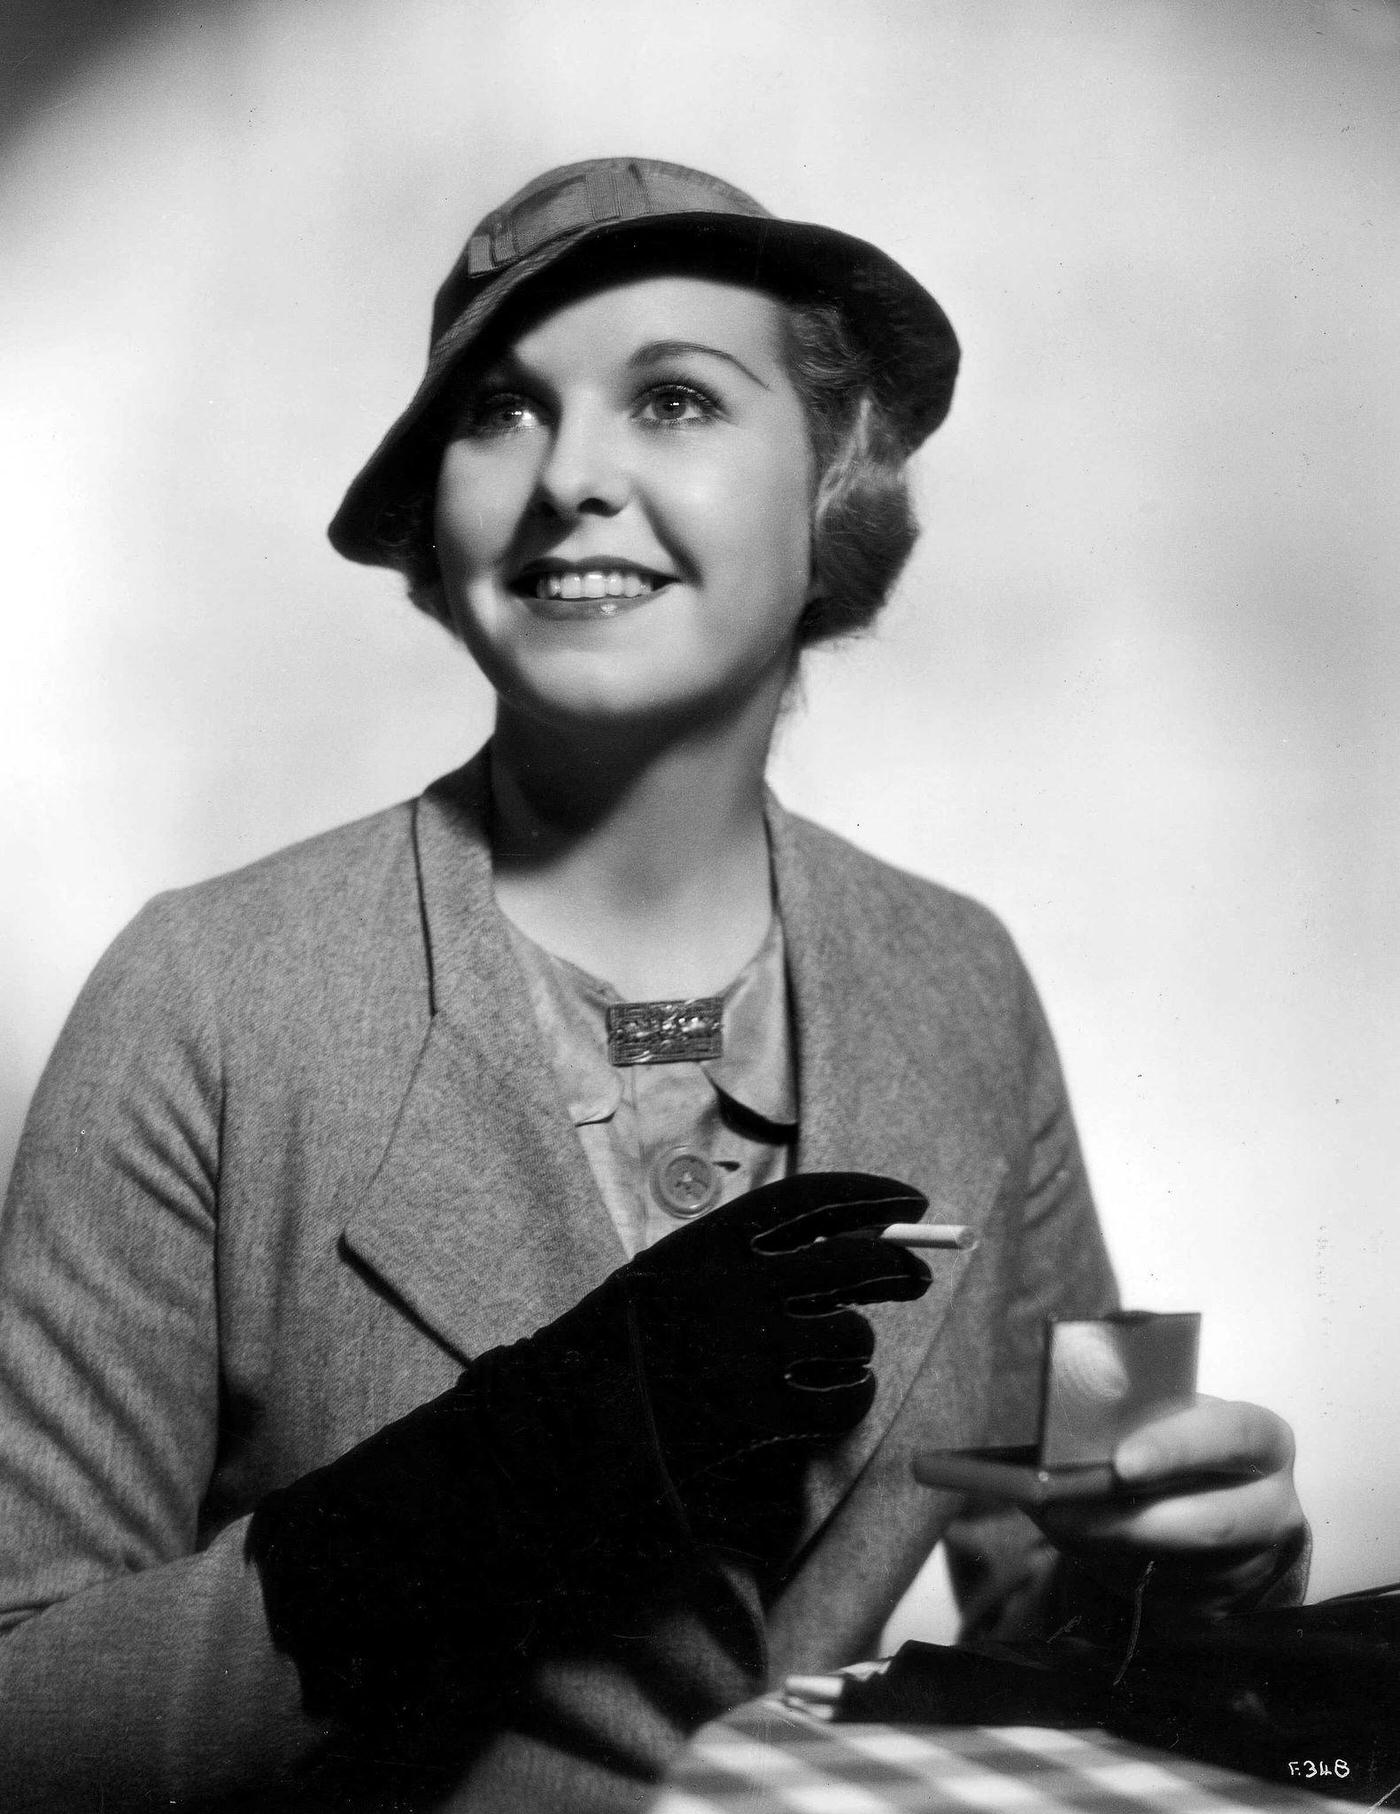 A lady wearing a grey flannel suit with a stitched hat and black gloves about to light up a cigarette, 1935